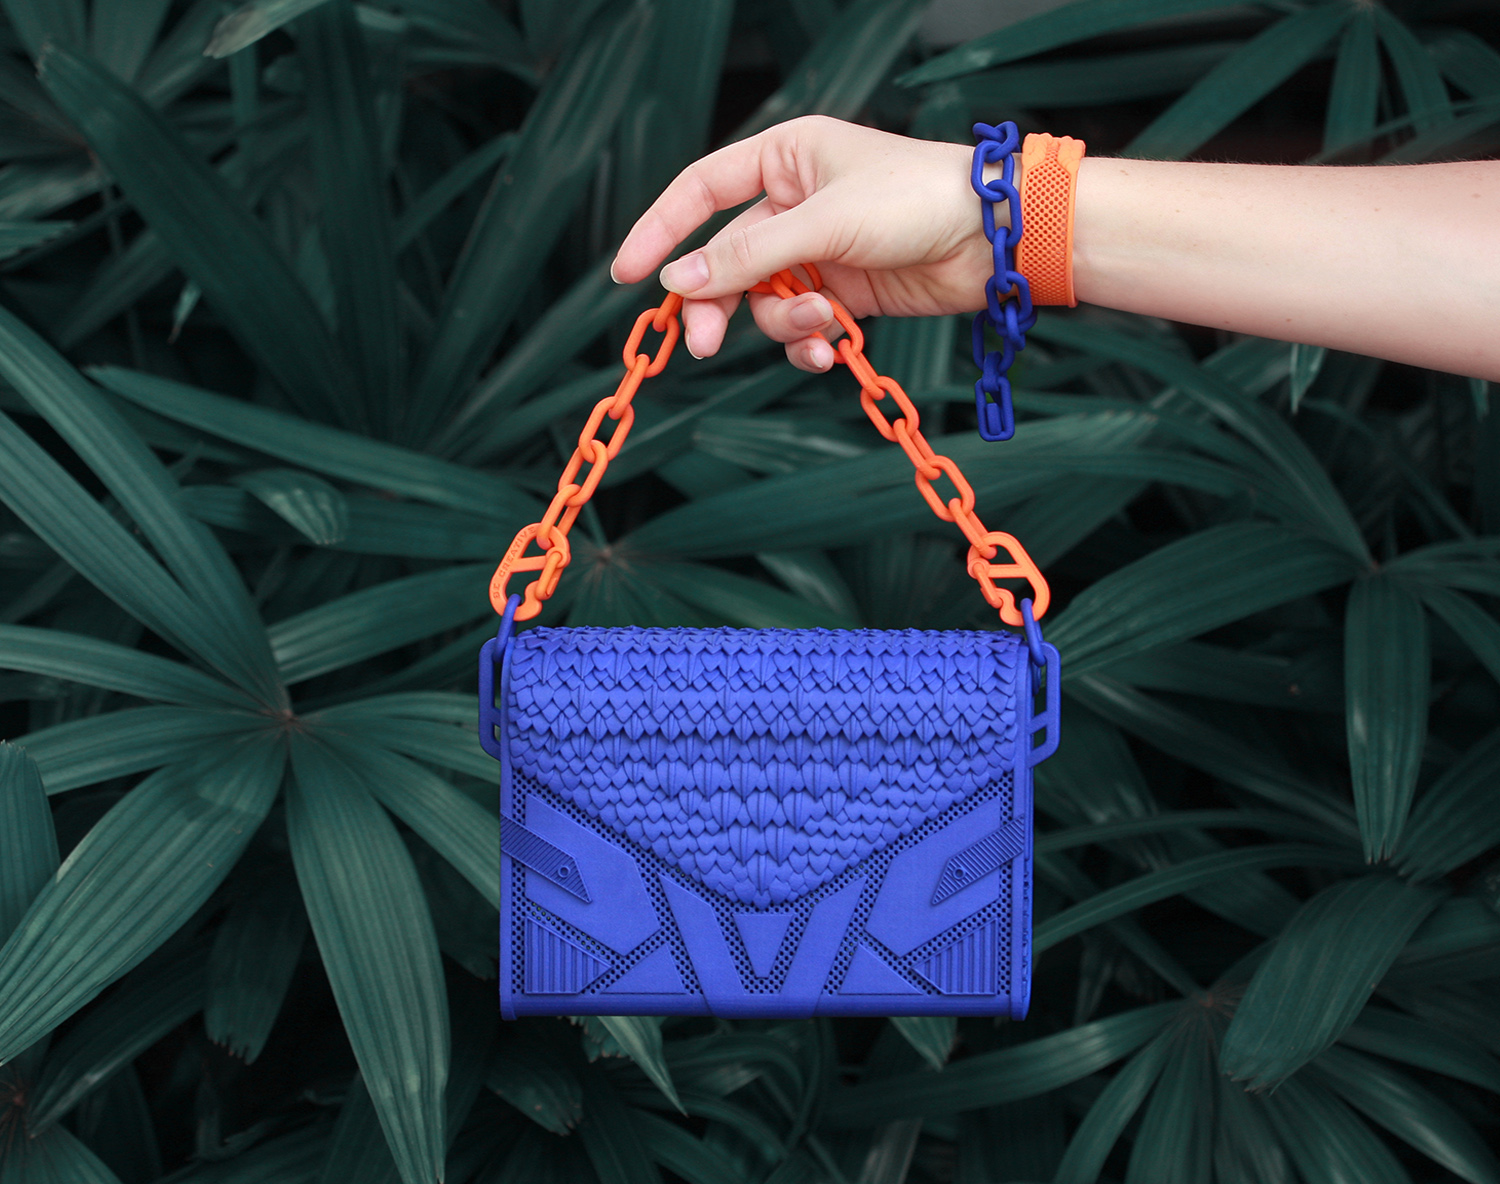 How a Creative Designer Created a Fully 3D-Printed Purse | 3D Printing